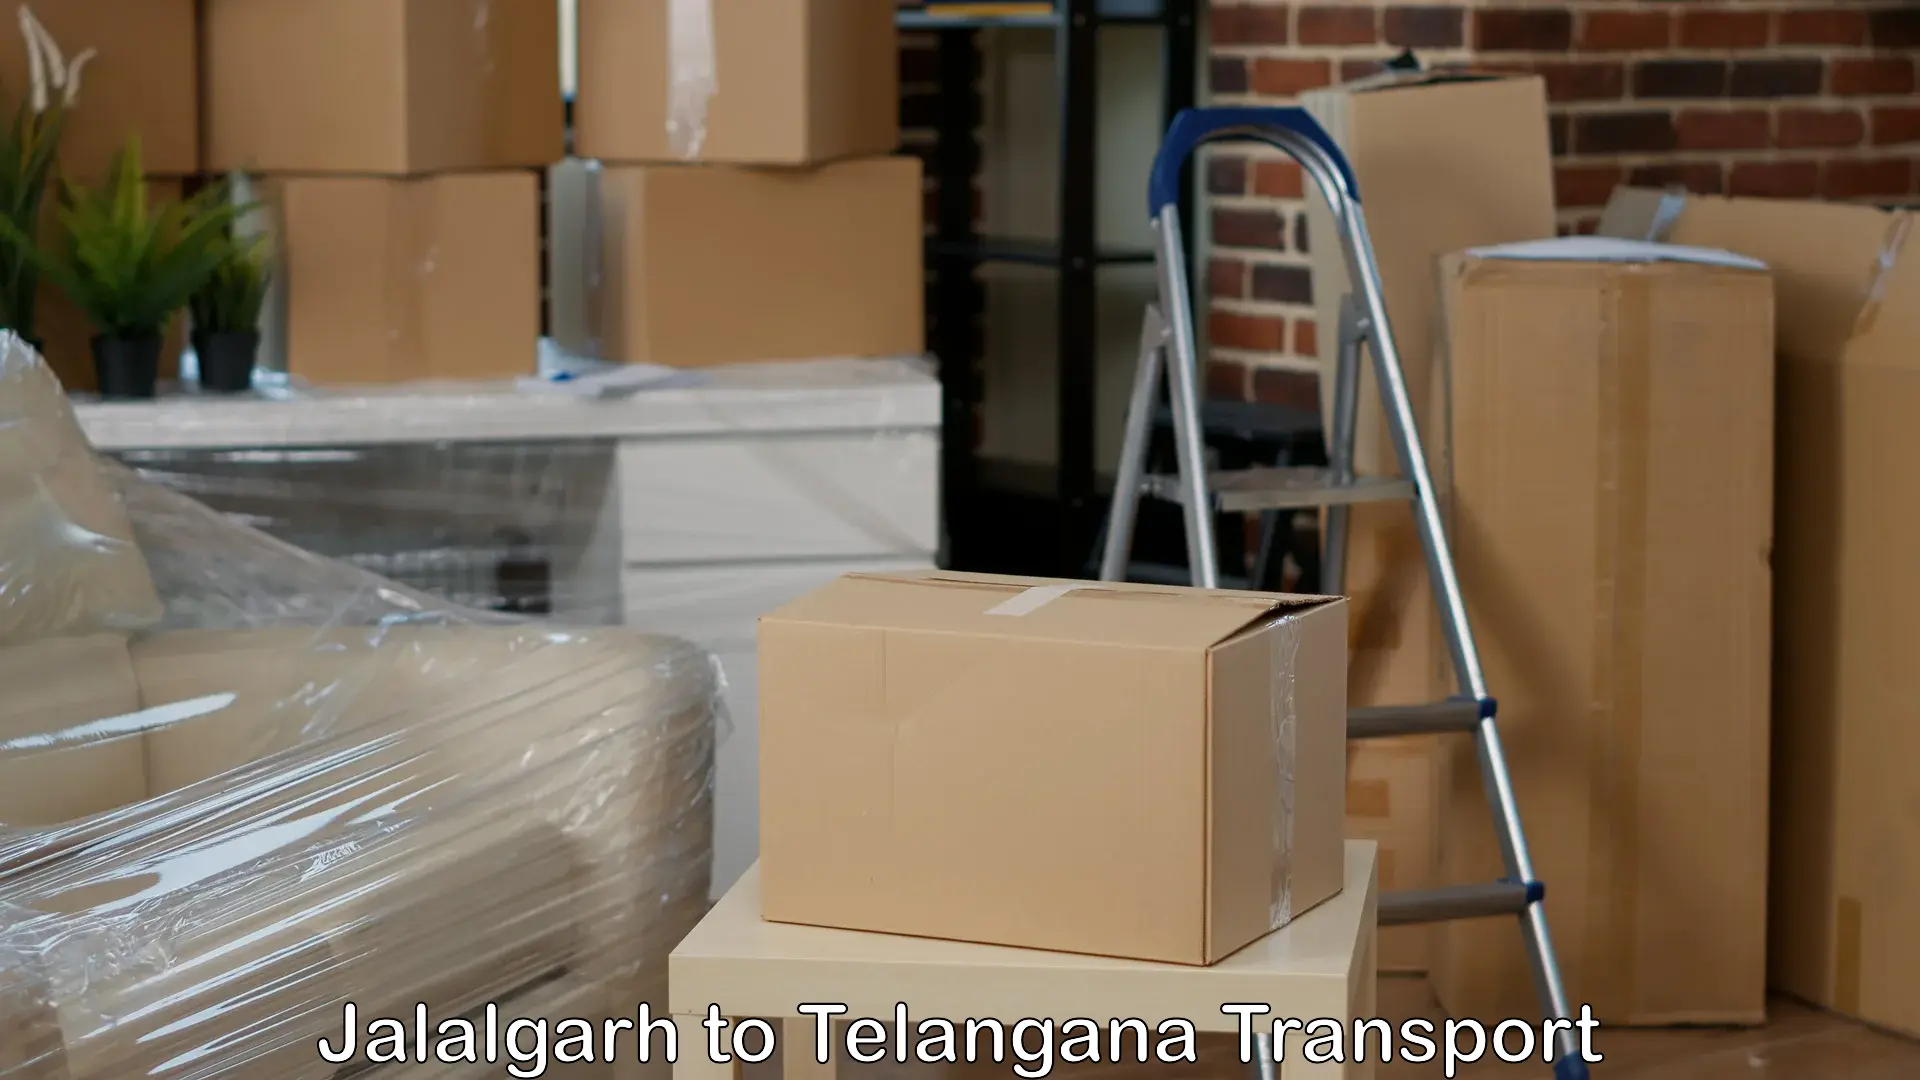 Package delivery services in Jalalgarh to Hyderabad